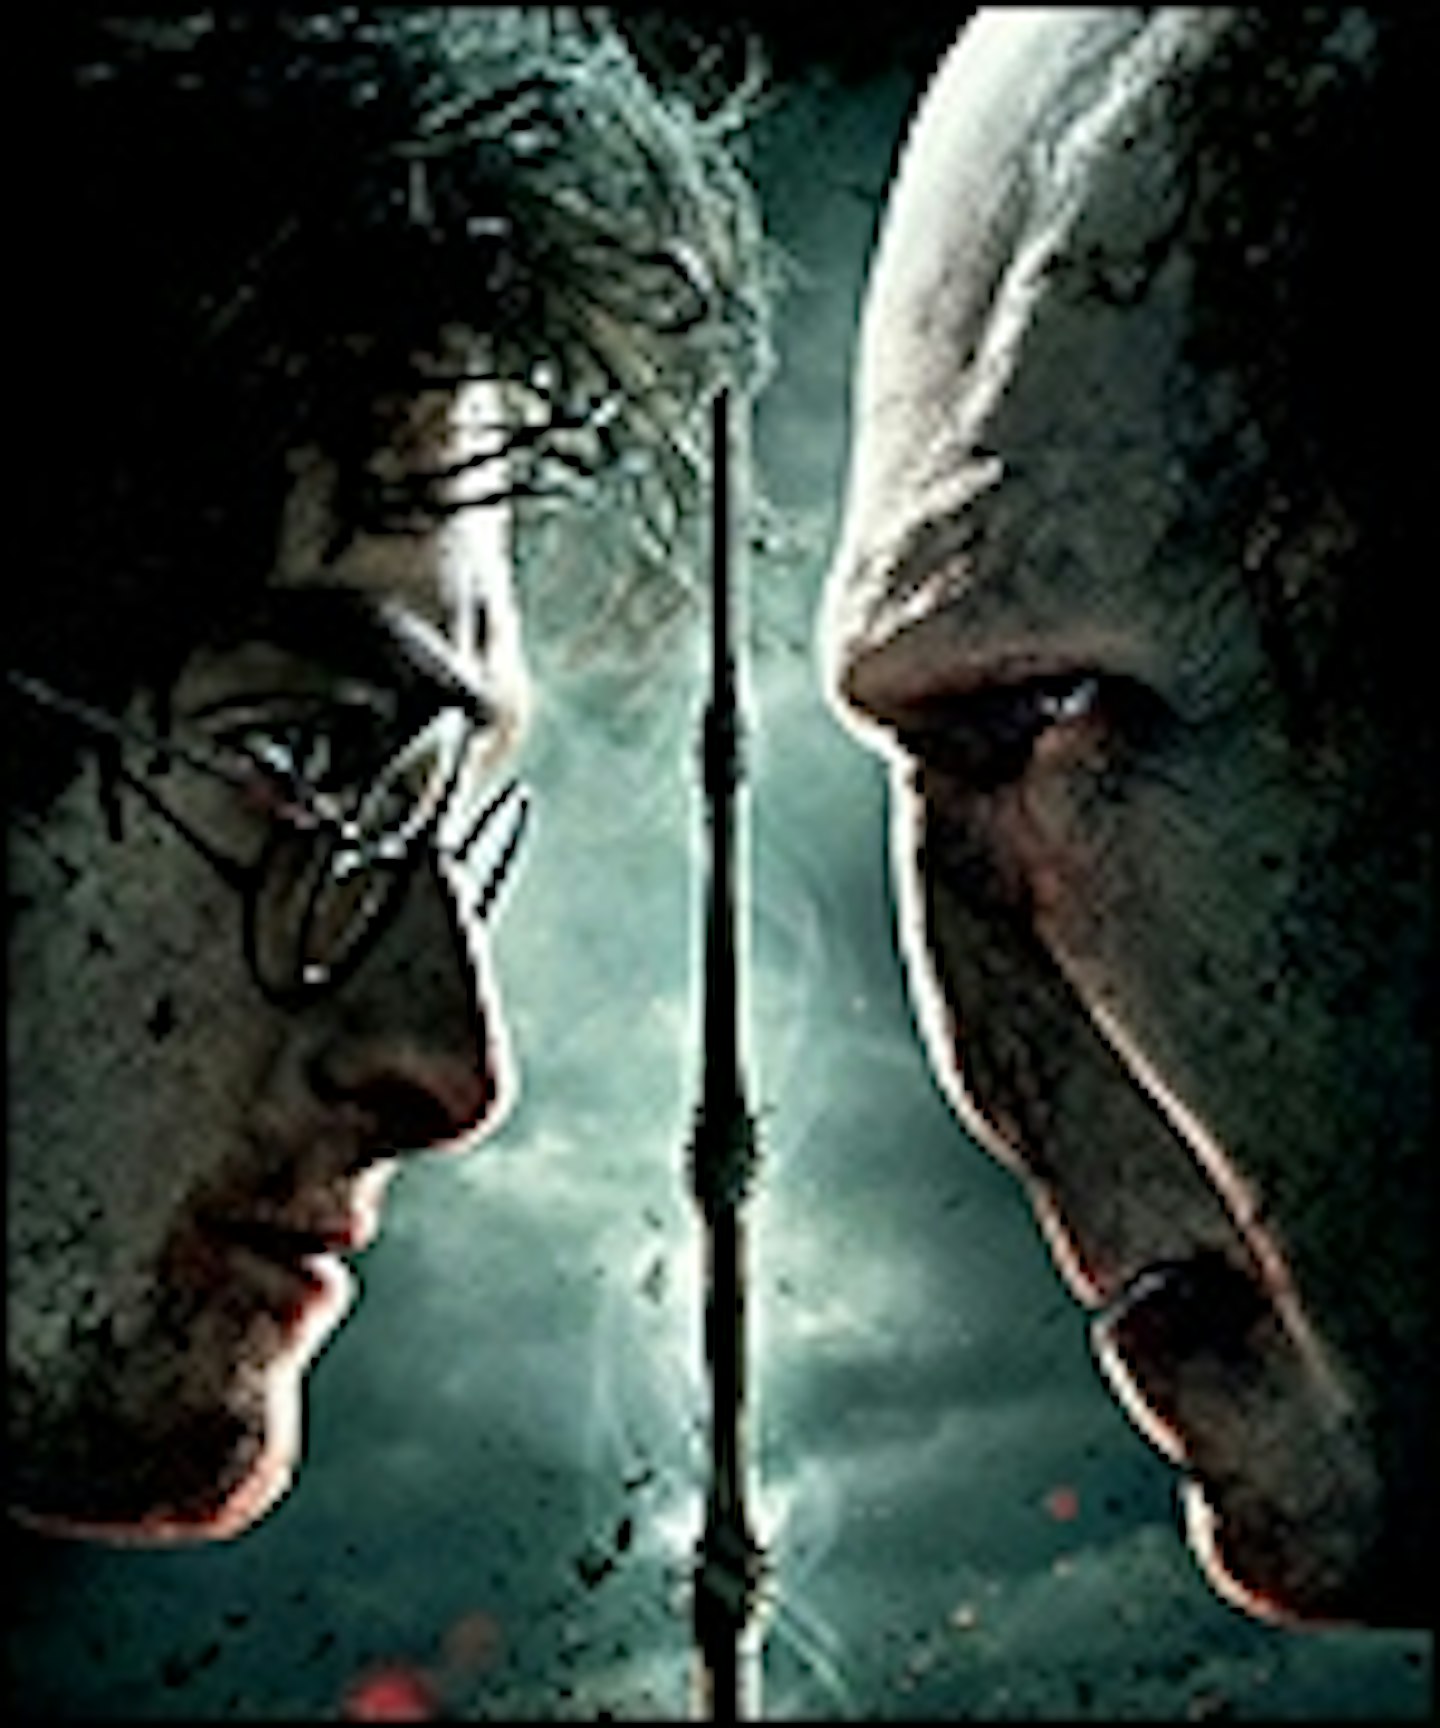 Deathly Hallows Part 2 Trailer Sweeps In